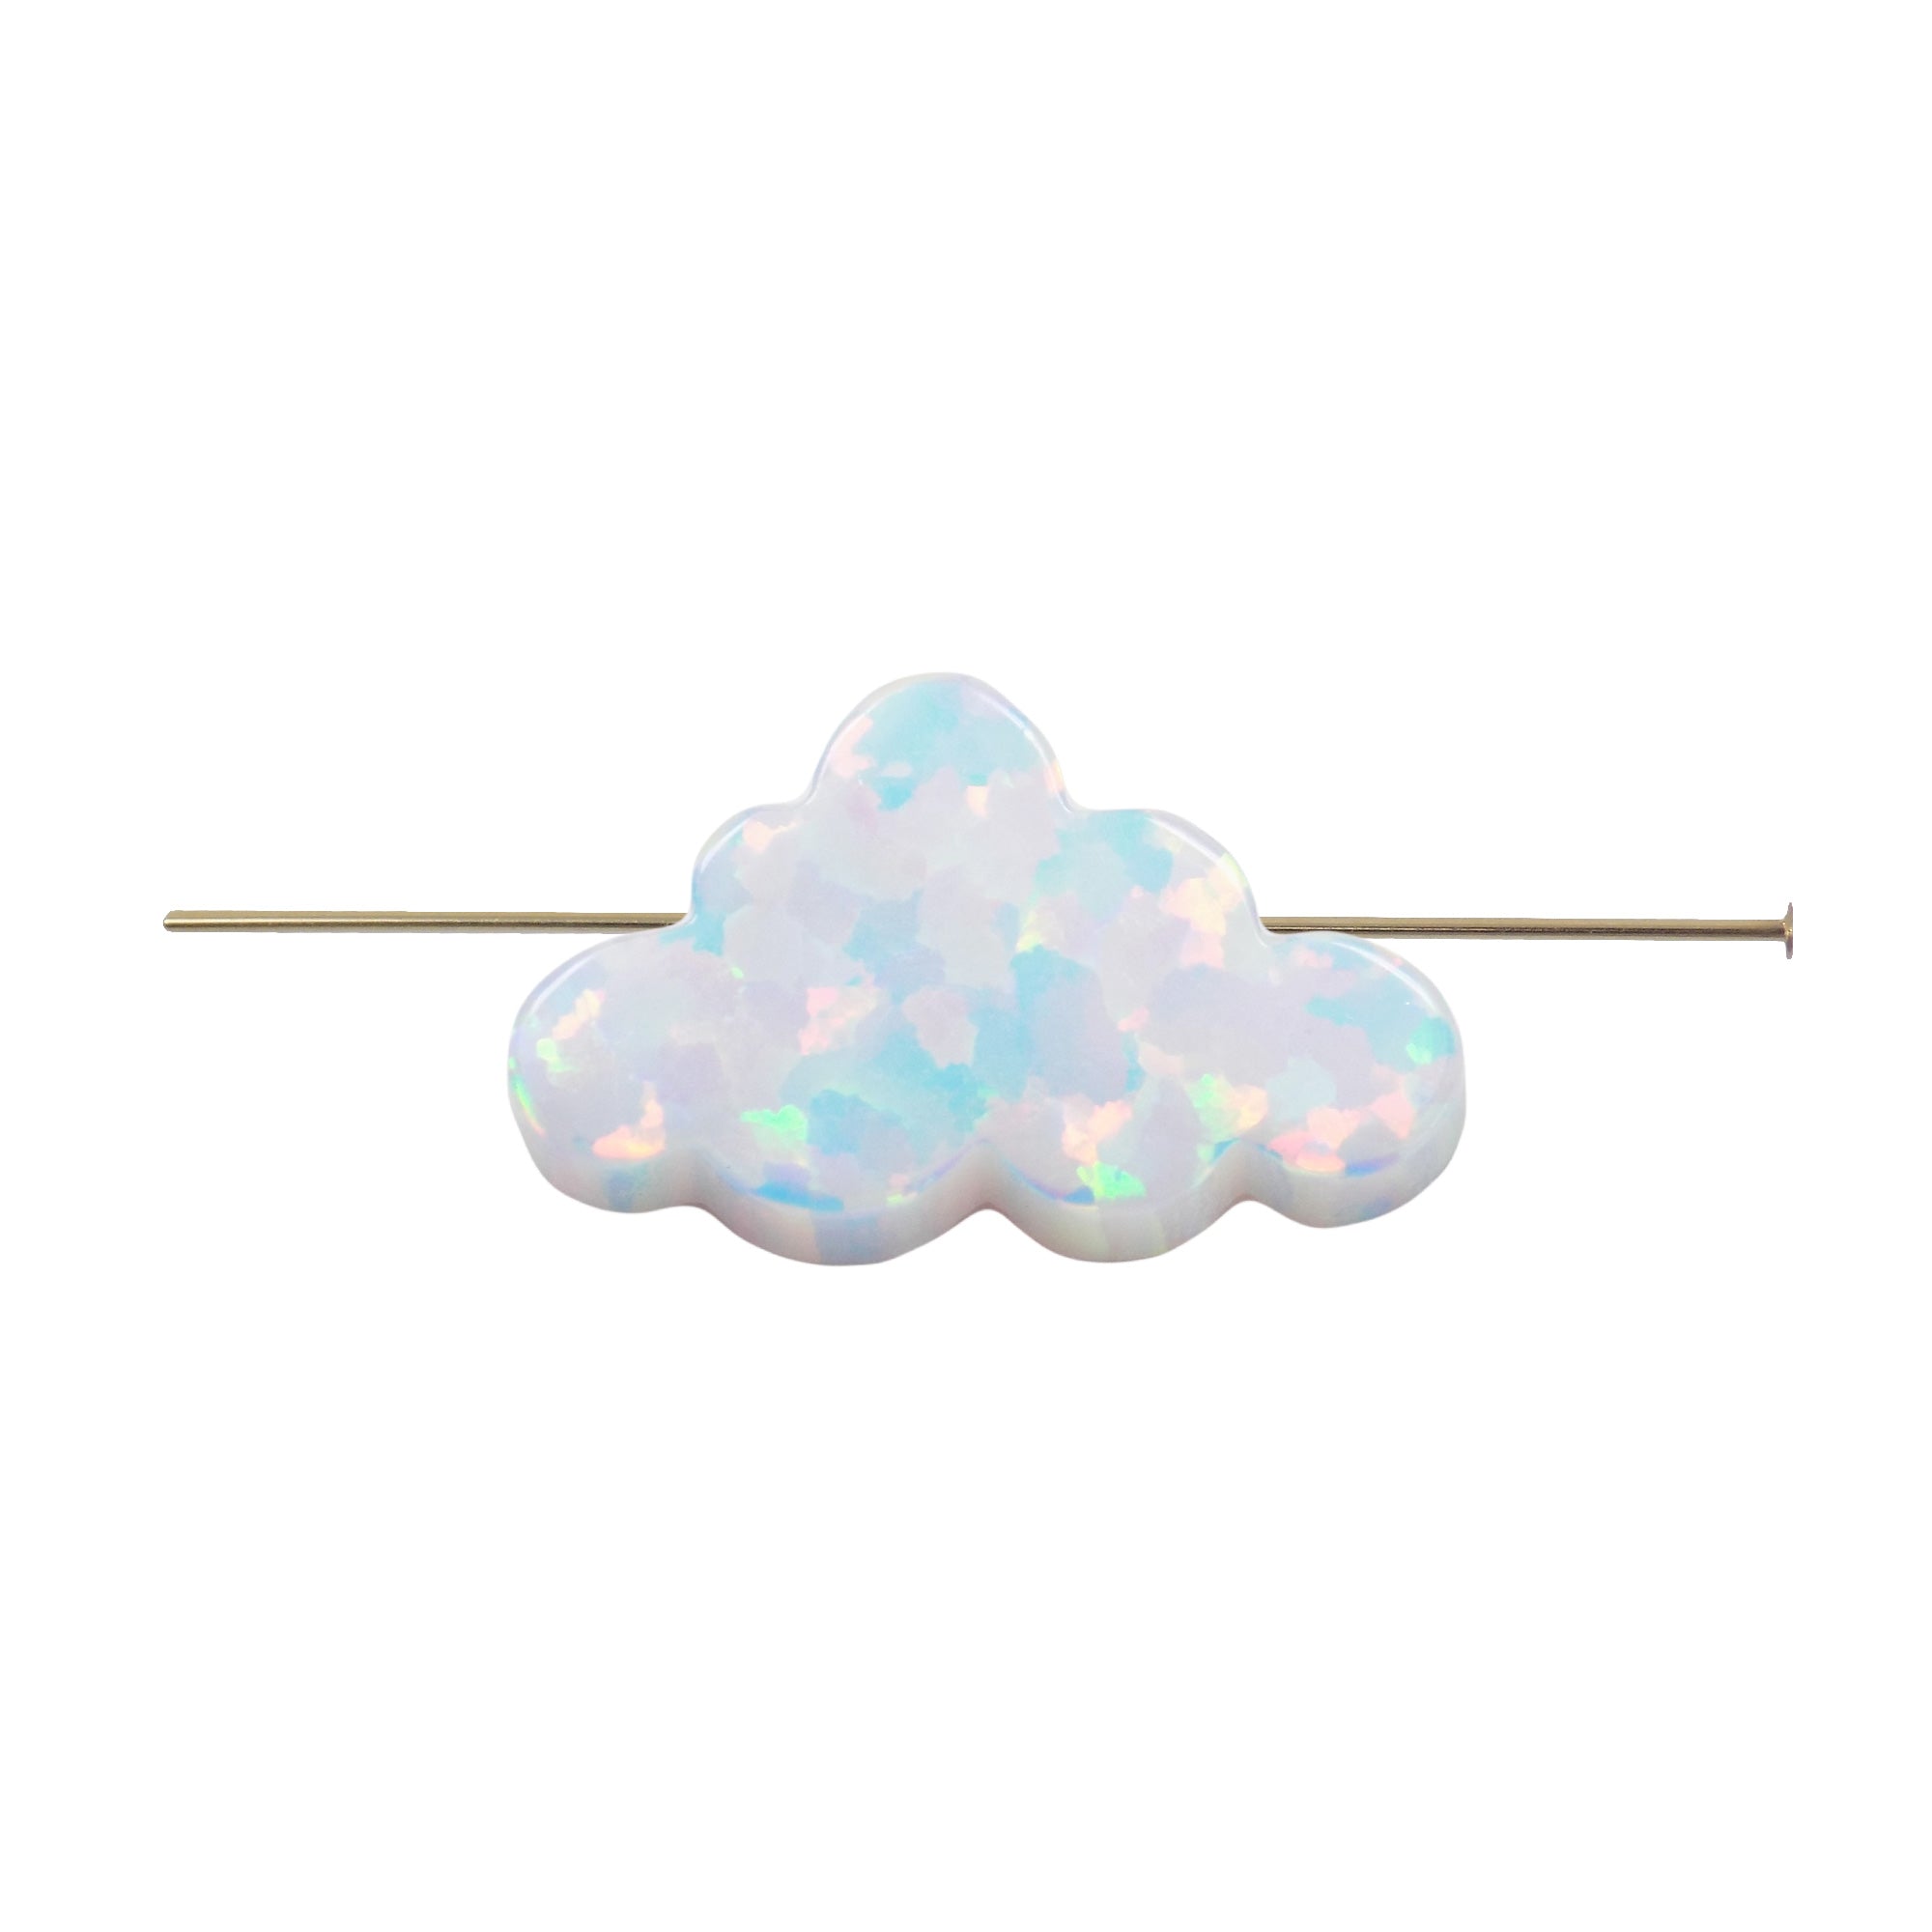 Opal Cloud Charm, White Cloud Pendant 7.3mmx12mm Thickness 2.7mm, hole size 1.30mm. Authentic Lab-created Opal